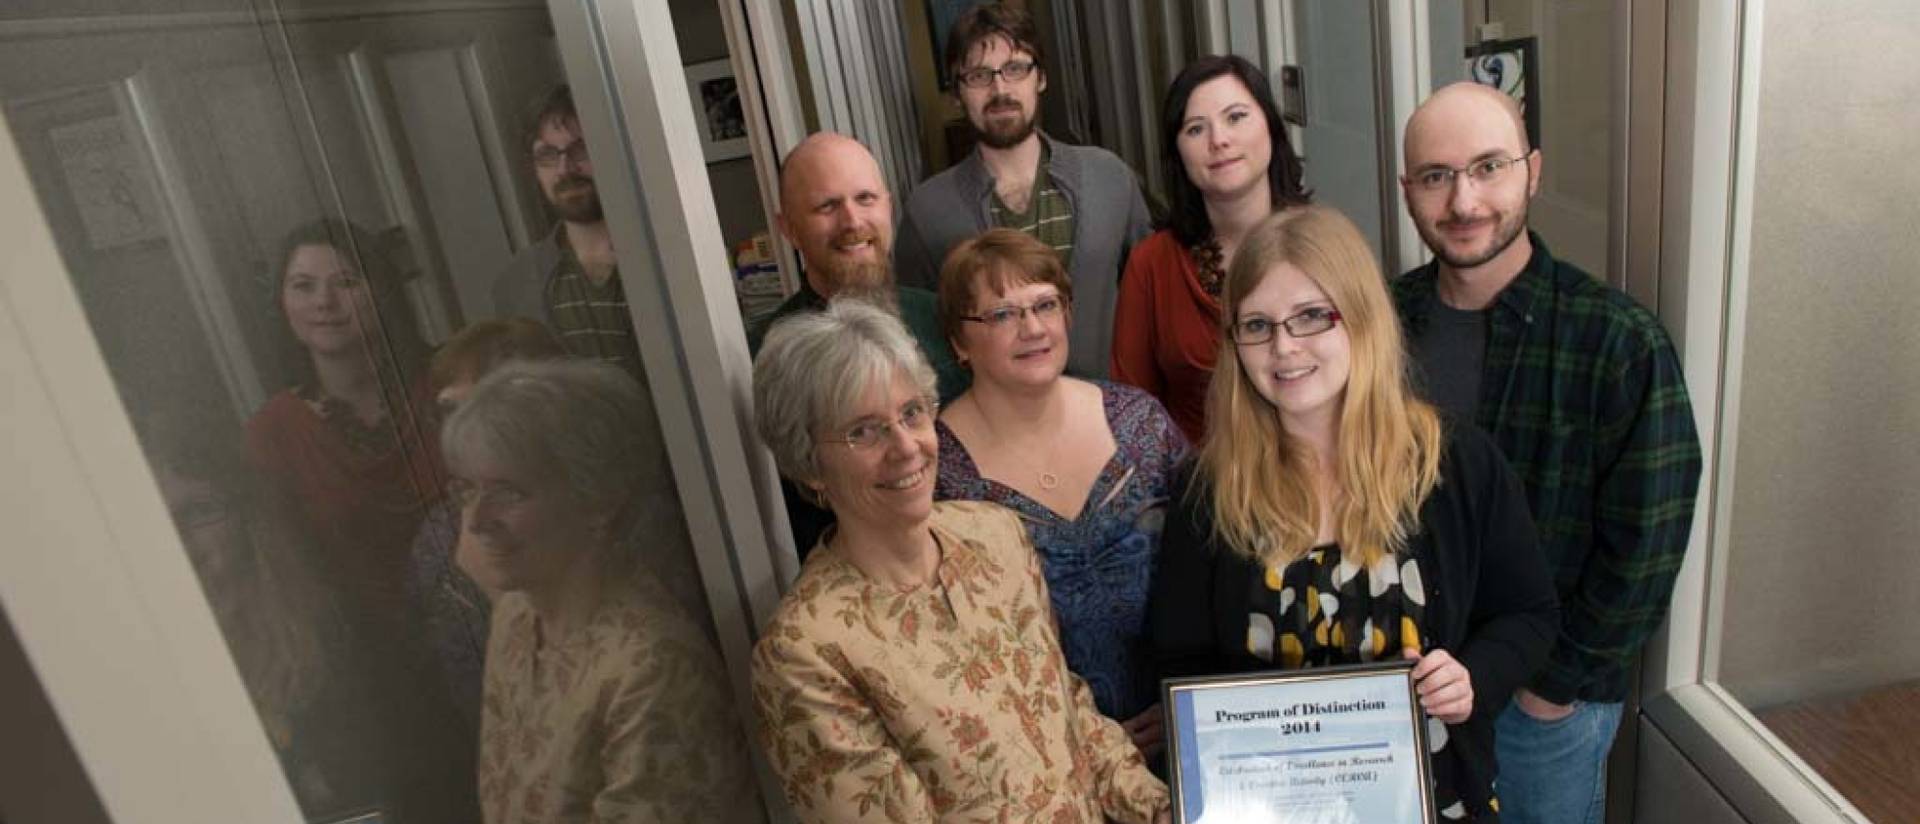 (left to right, front row), Karen Havholm, Ann Statz, business manager, Carissa Beckwith, office assistant, Chris Zimmerman, graduate assistant (left to right, back row), Jeremy Miner, Erik Williams, graduate assistant, Heather Johnson-Schmitz